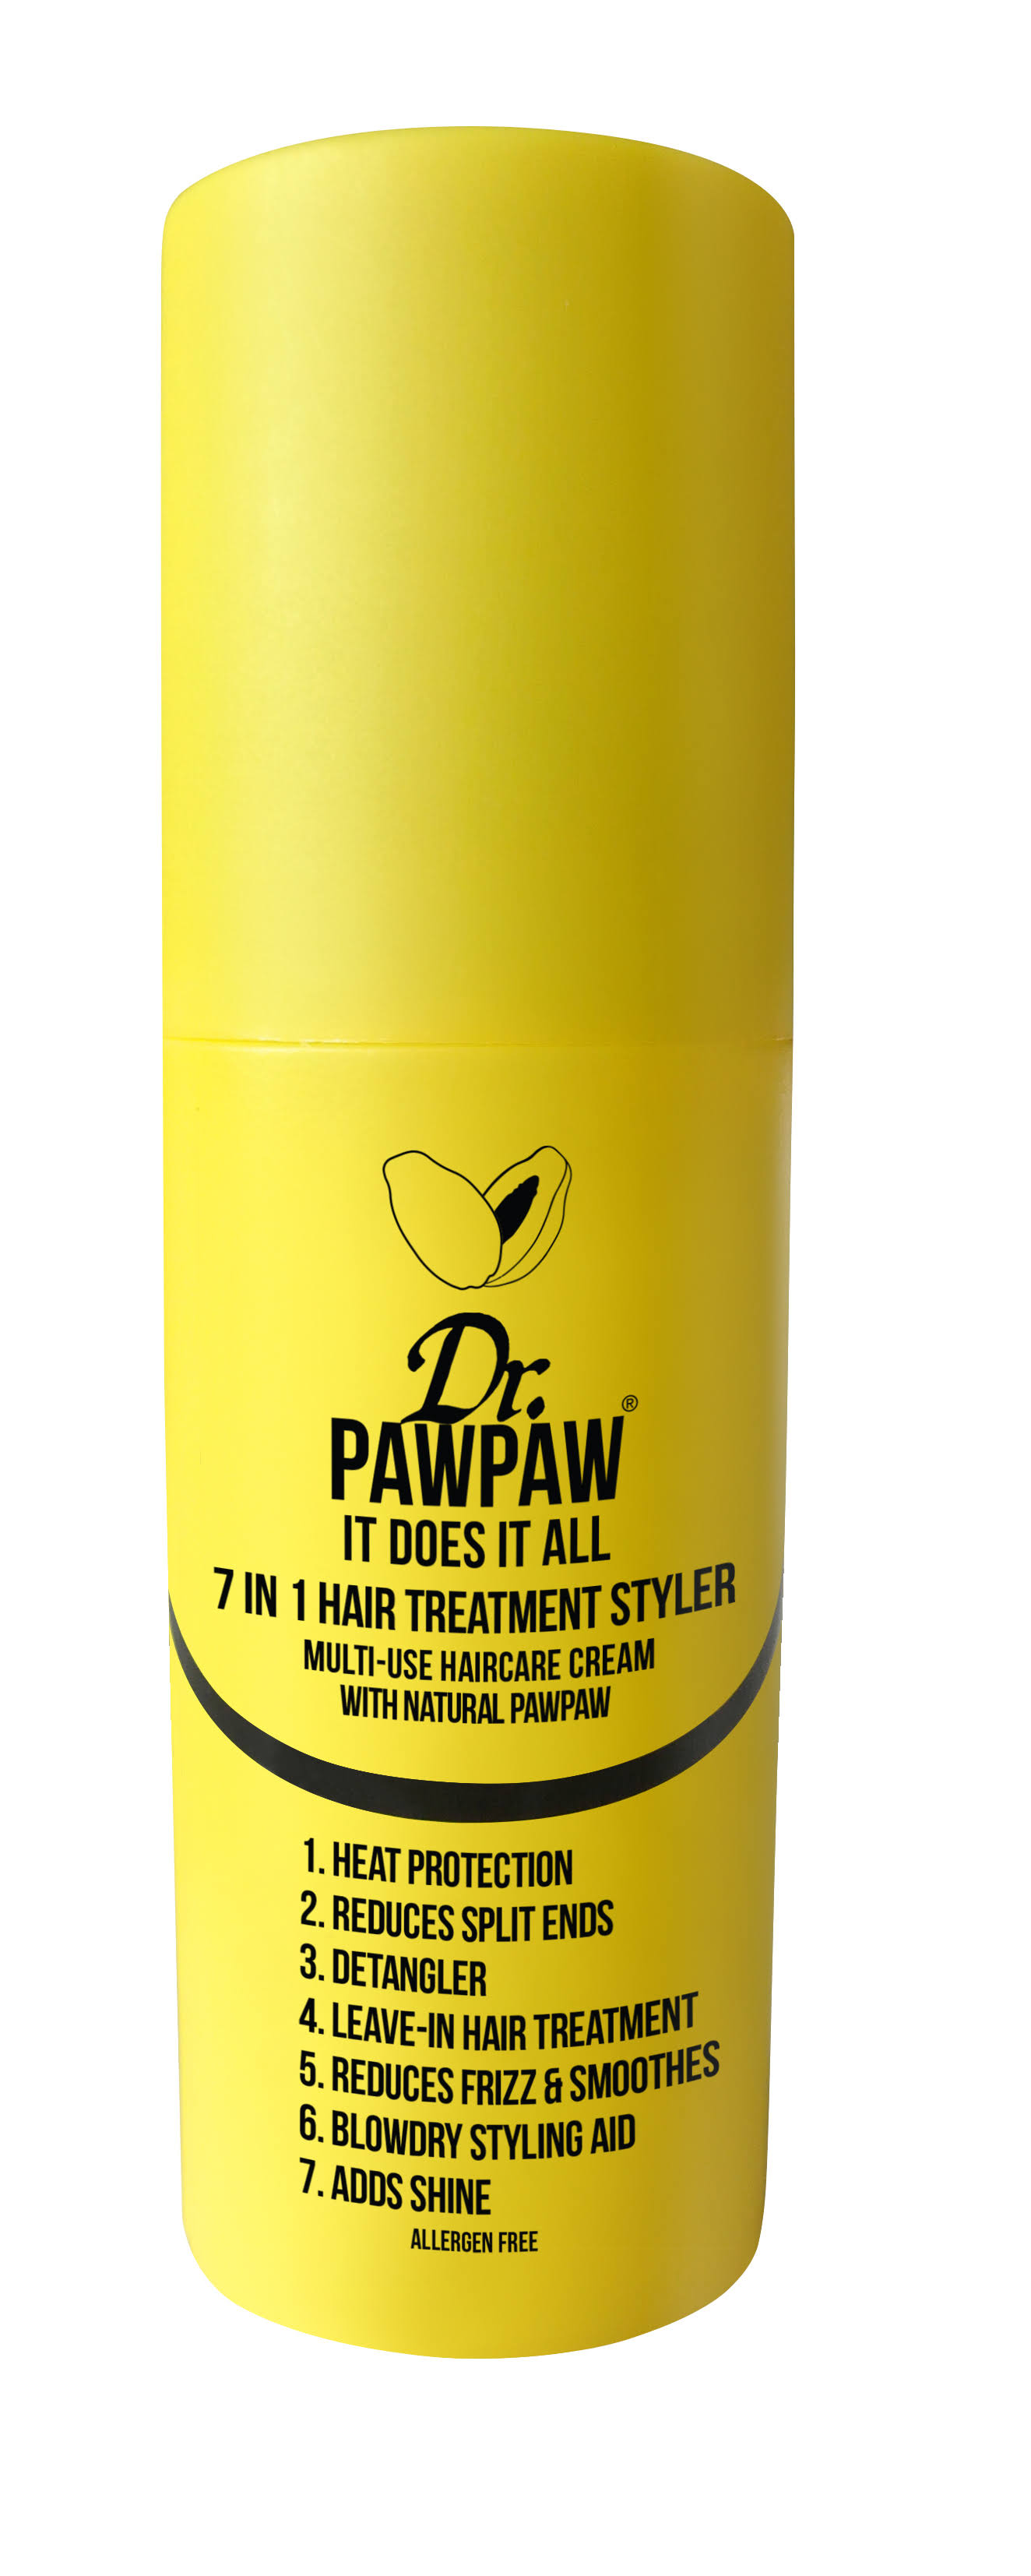 Dr Pawpaw It Does It All 7 in 1 Hair Treatment Styler - 150ml